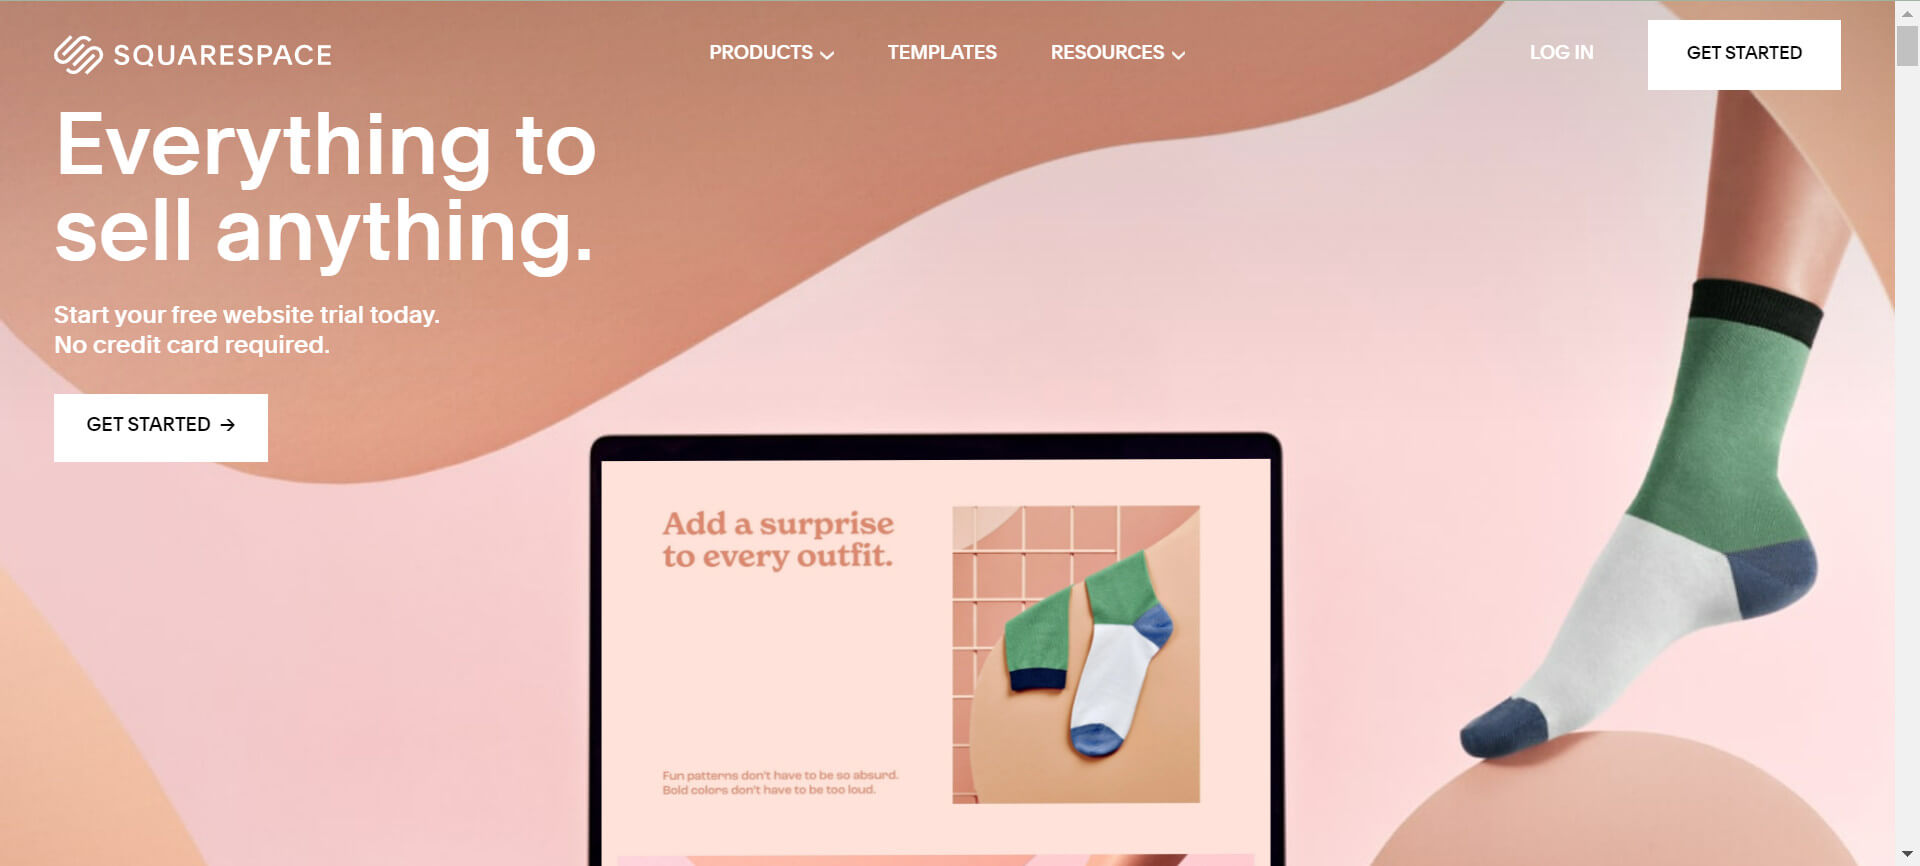 The third Etsy competitor is Squarespace